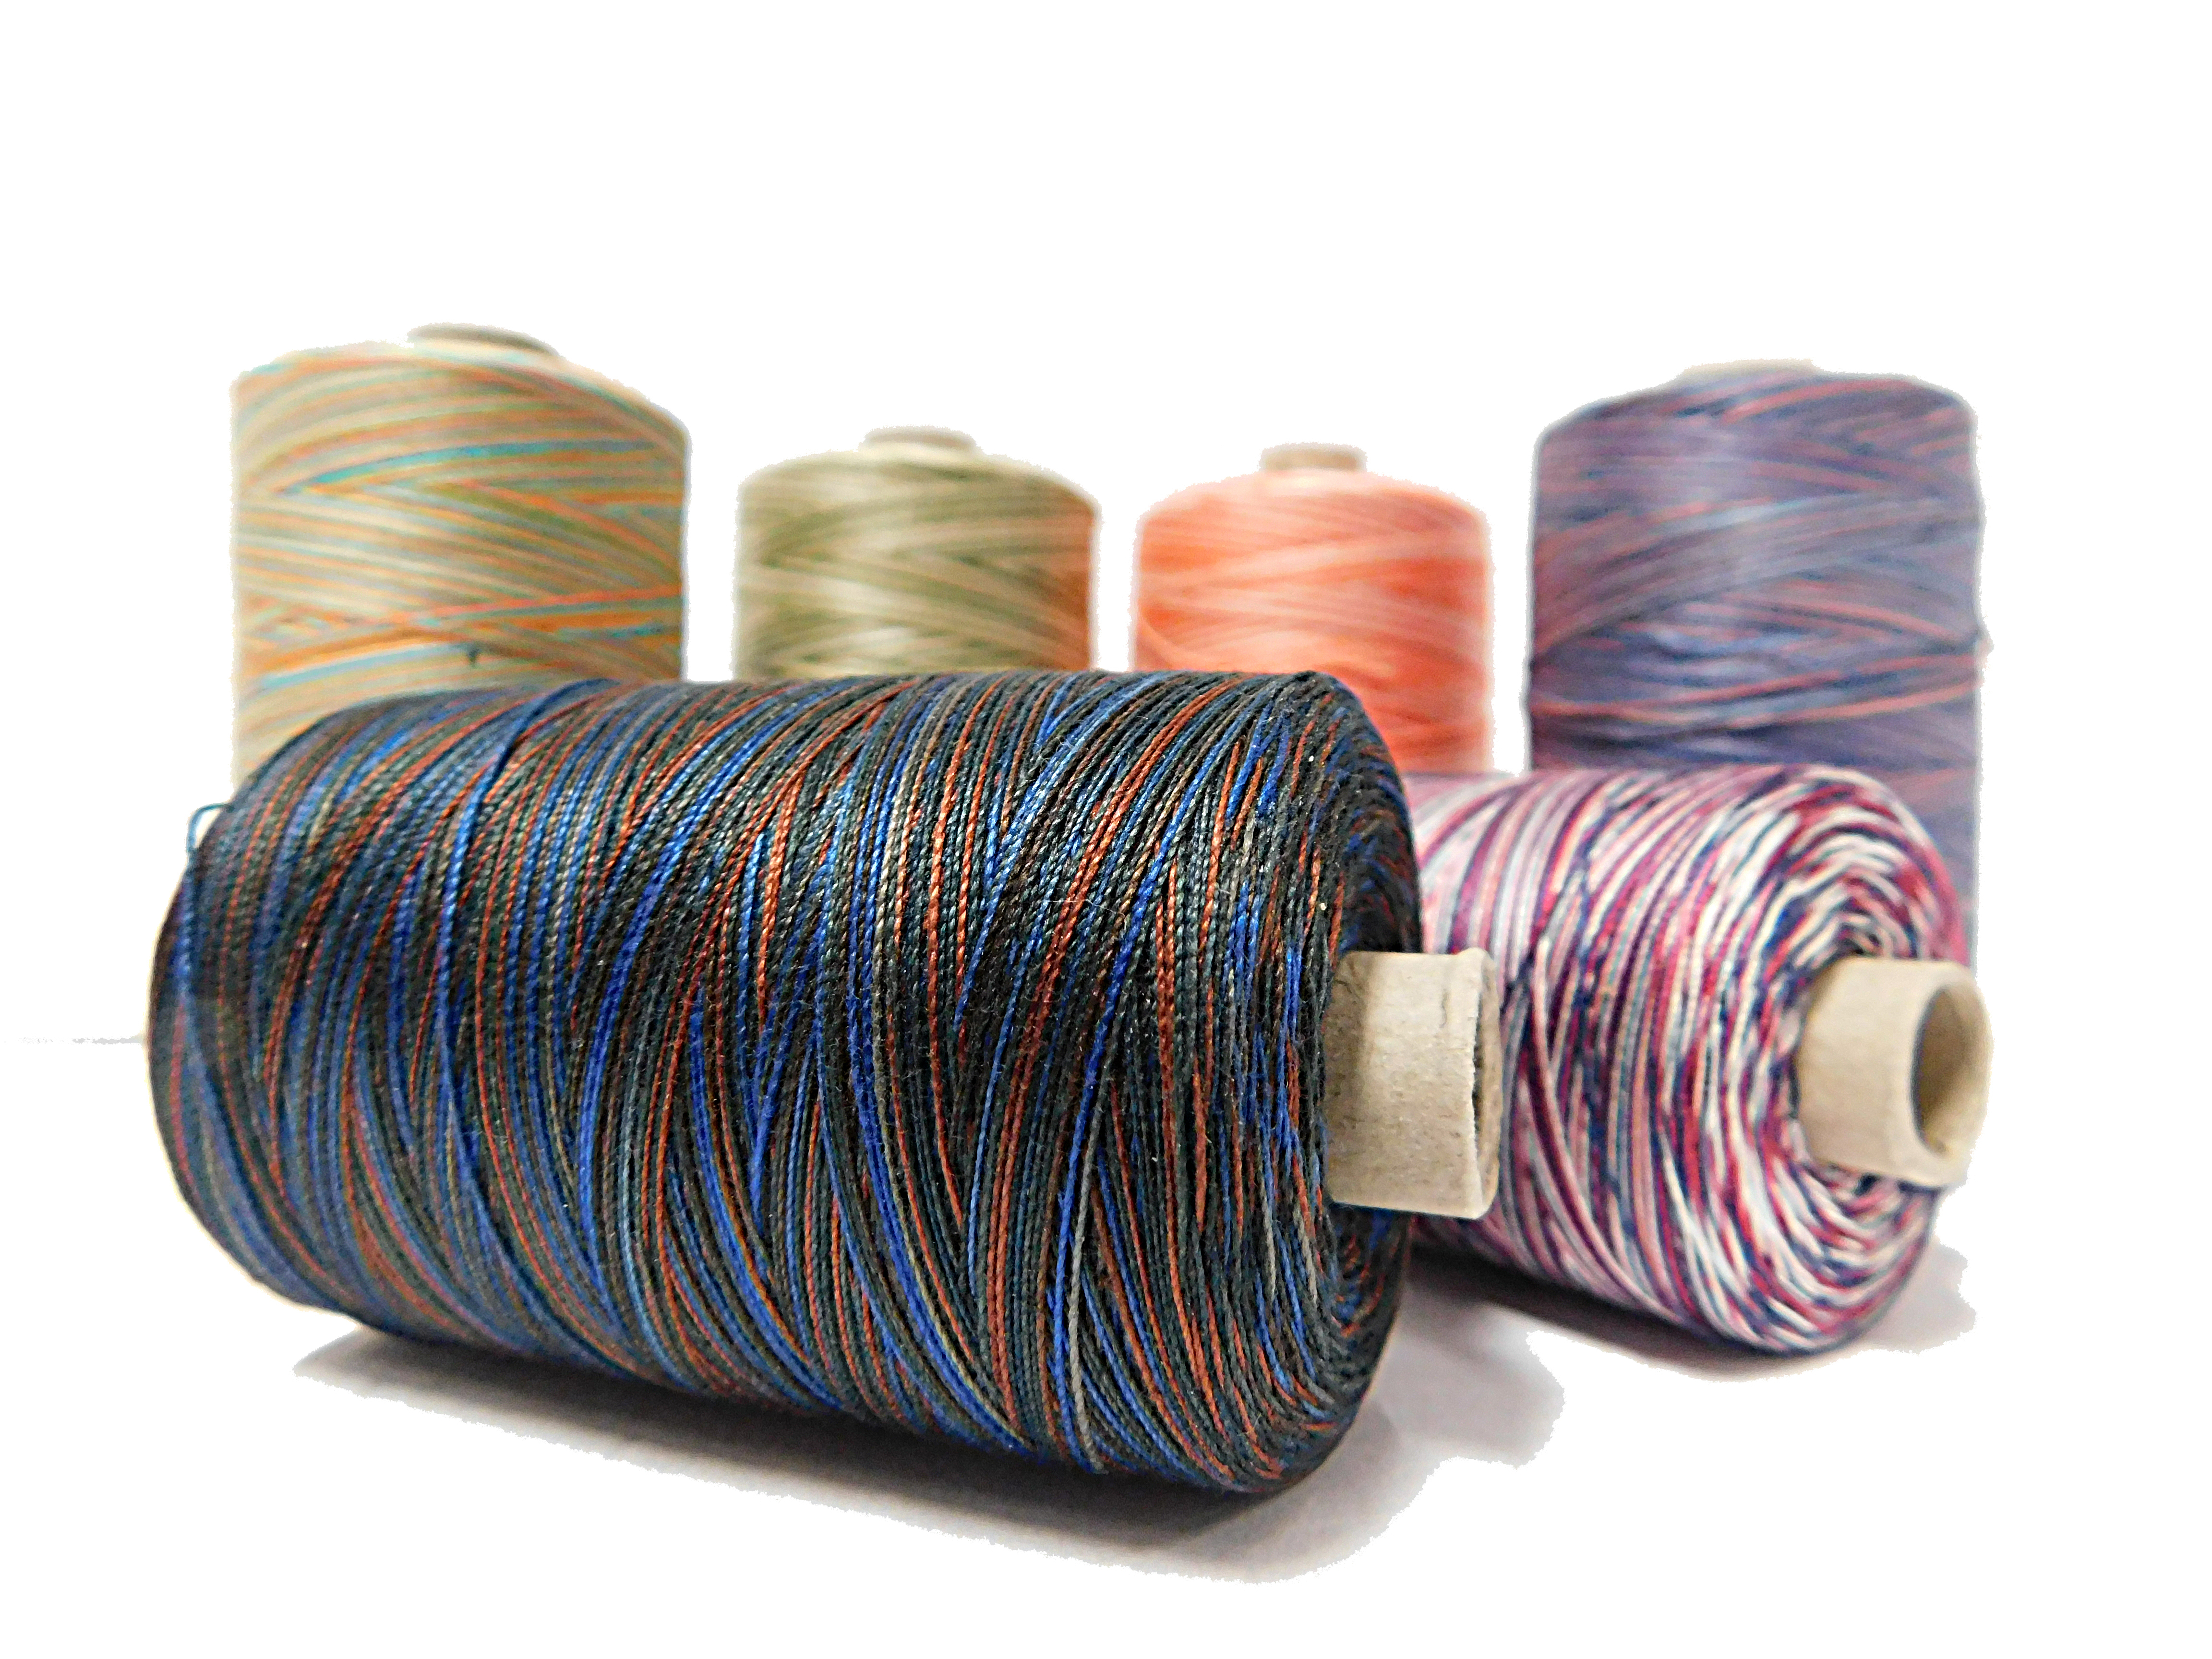 Save 35% on Aurifil cotton thread closeouts, available in 40-Weightt, 40/3, and 50-Weight on smaller spools and larger cones. We also have Valdani cotton thread grab bags at a great value, including our 3 spool variegated cotton thread grab bag with 1080-Yards per spool, and our 5 mini-spool grab bag with 273-Yards per spool.